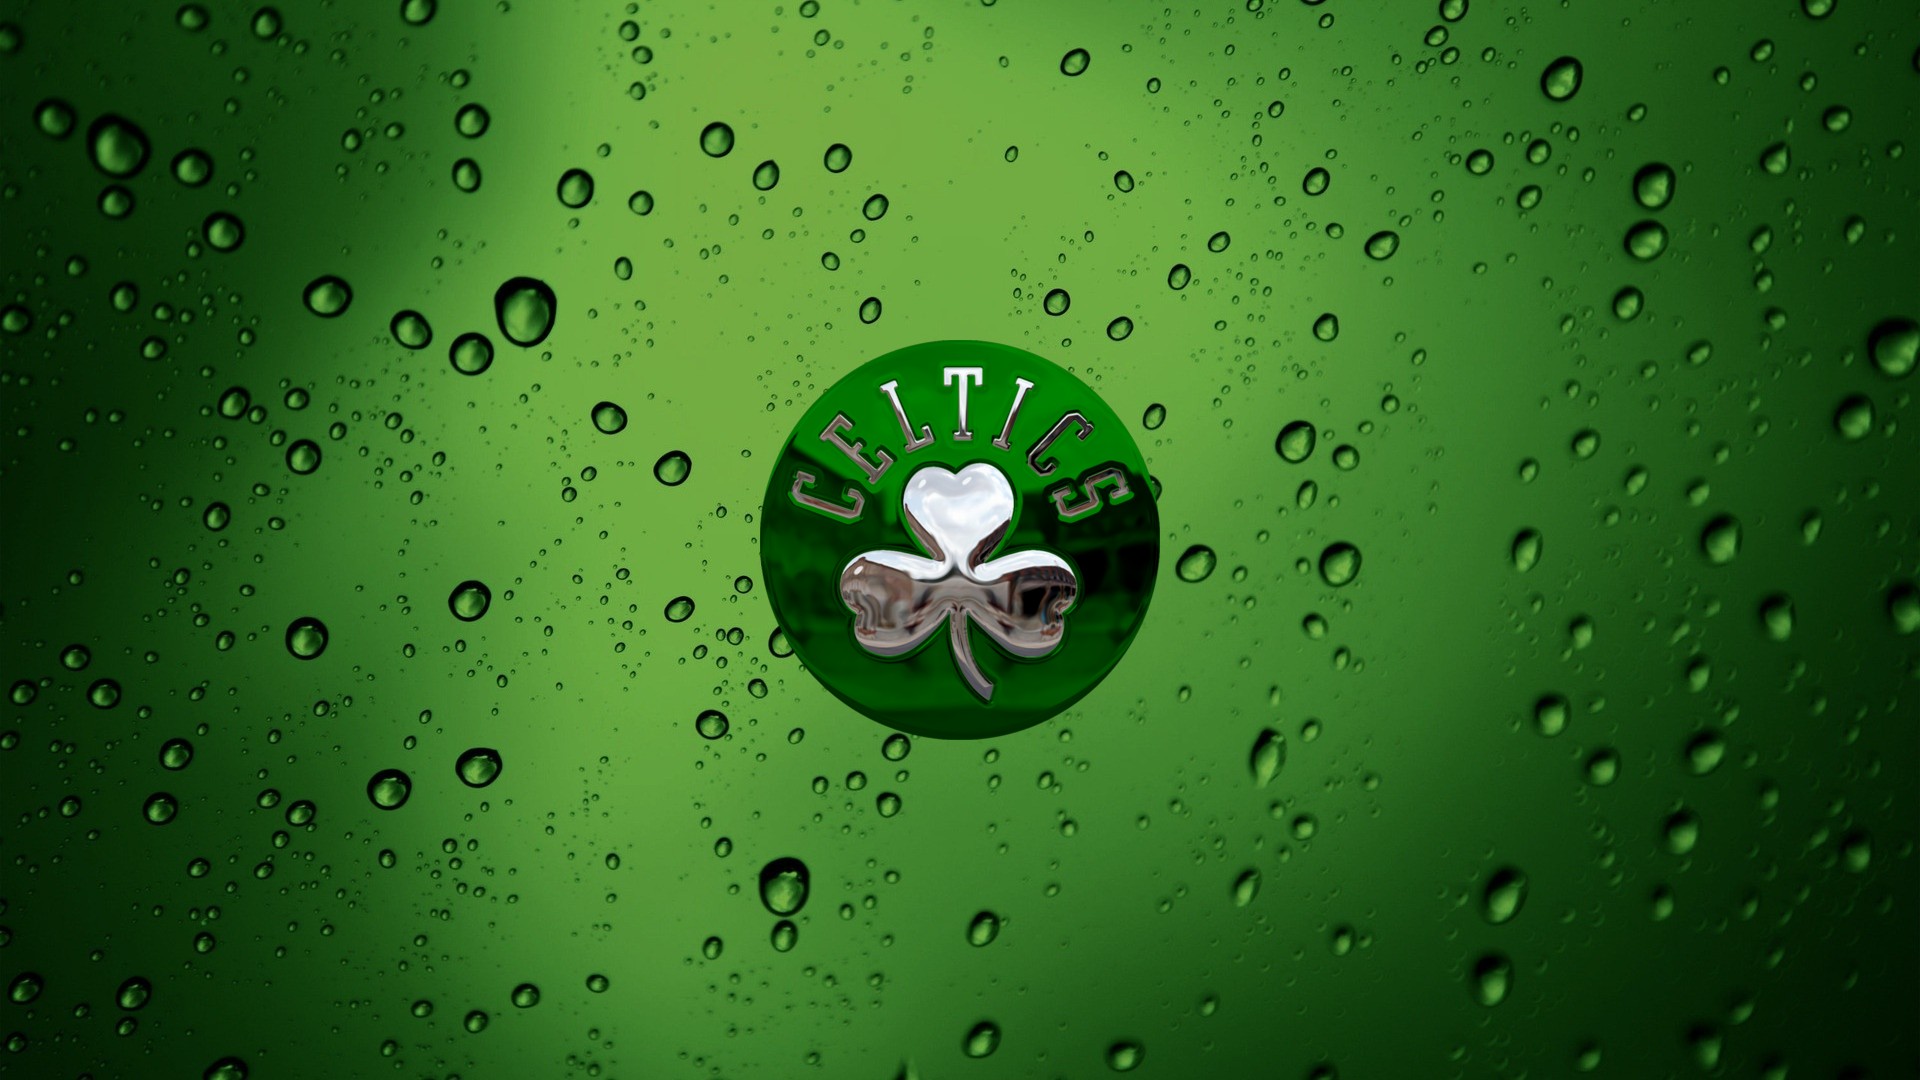 Best Boston Celtics Wallpaper HD with image resolution 1920x1080 pixel. You can make this wallpaper for your Desktop Computer Backgrounds, Mac Wallpapers, Android Lock screen or iPhone Screensavers